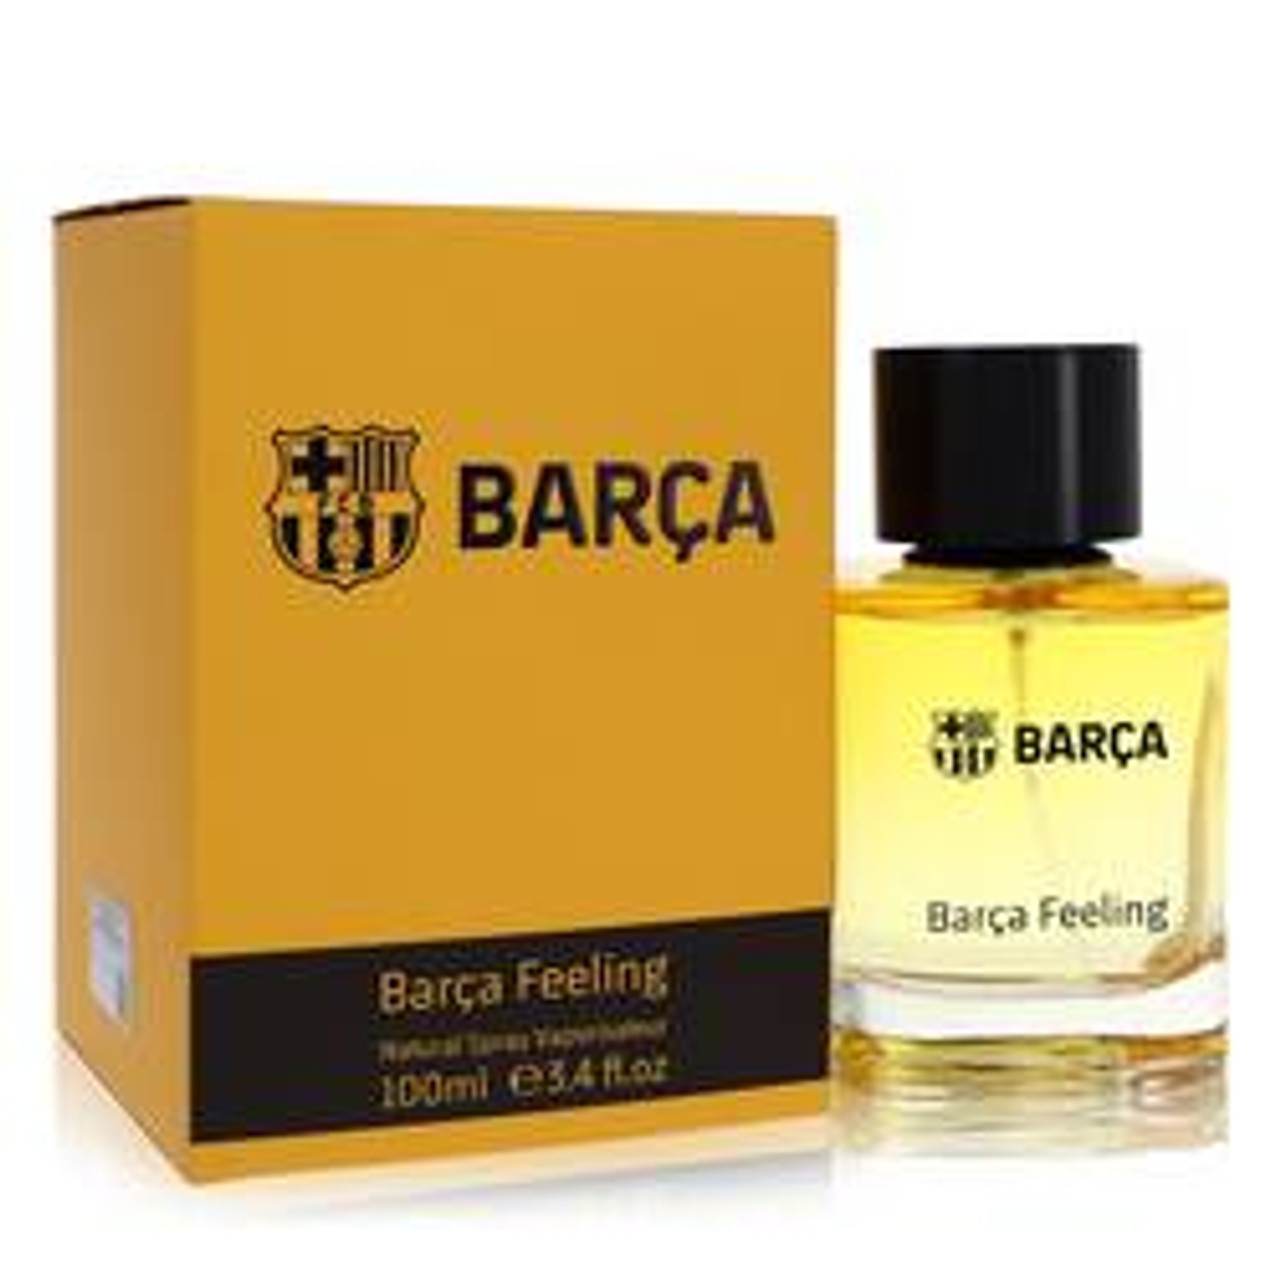 Barca Feeling Cologne By Barca Eau De Parfum Spray 3.4 oz for Men - [From 63.00 - Choose pk Qty ] - *Ships from Miami